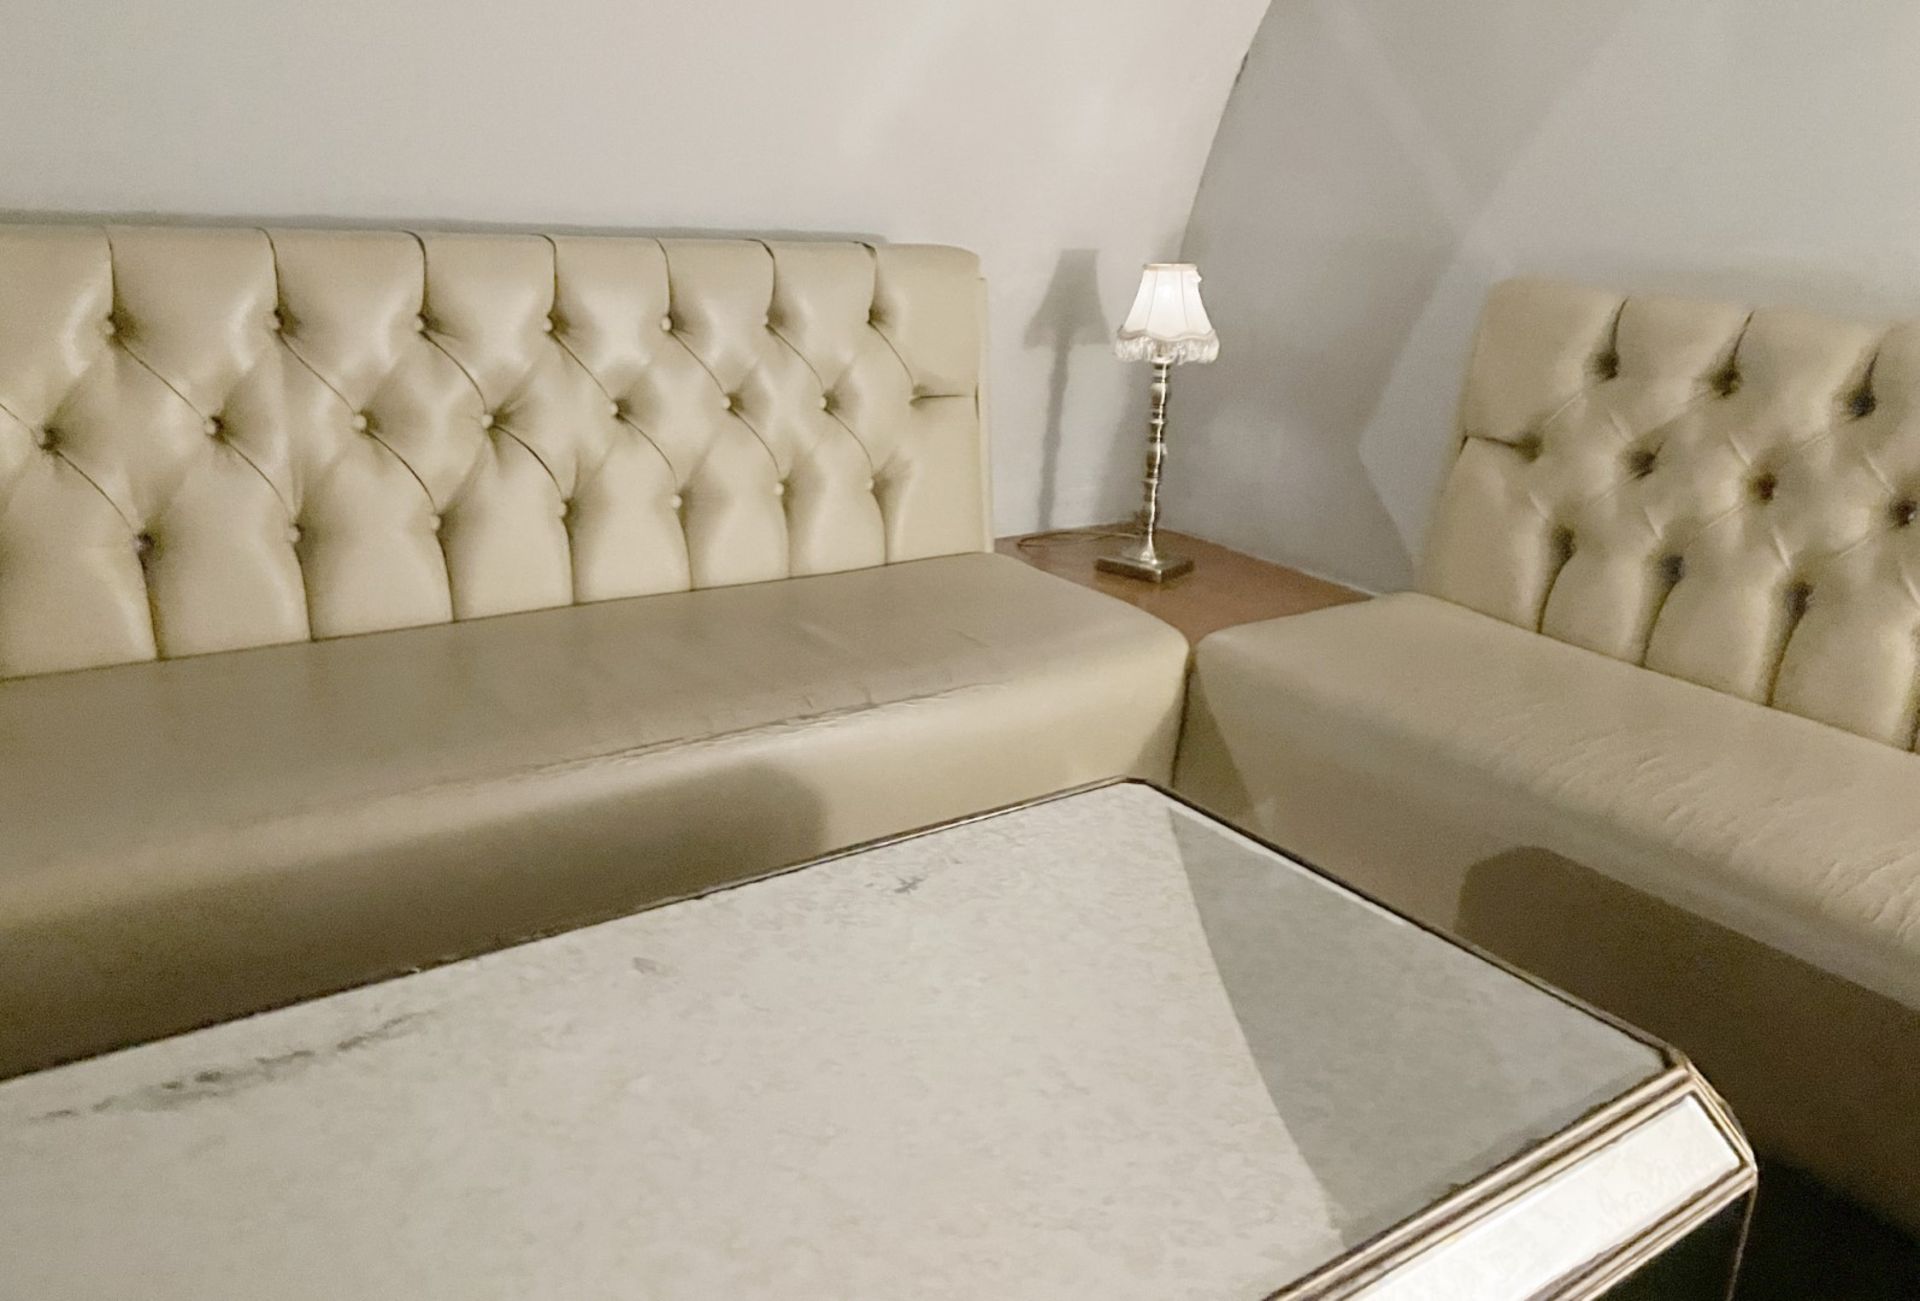 3 x Long Sections of Button Back Banquette Booth Seating Upholstered in a Cream Faux Leather - Image 3 of 8